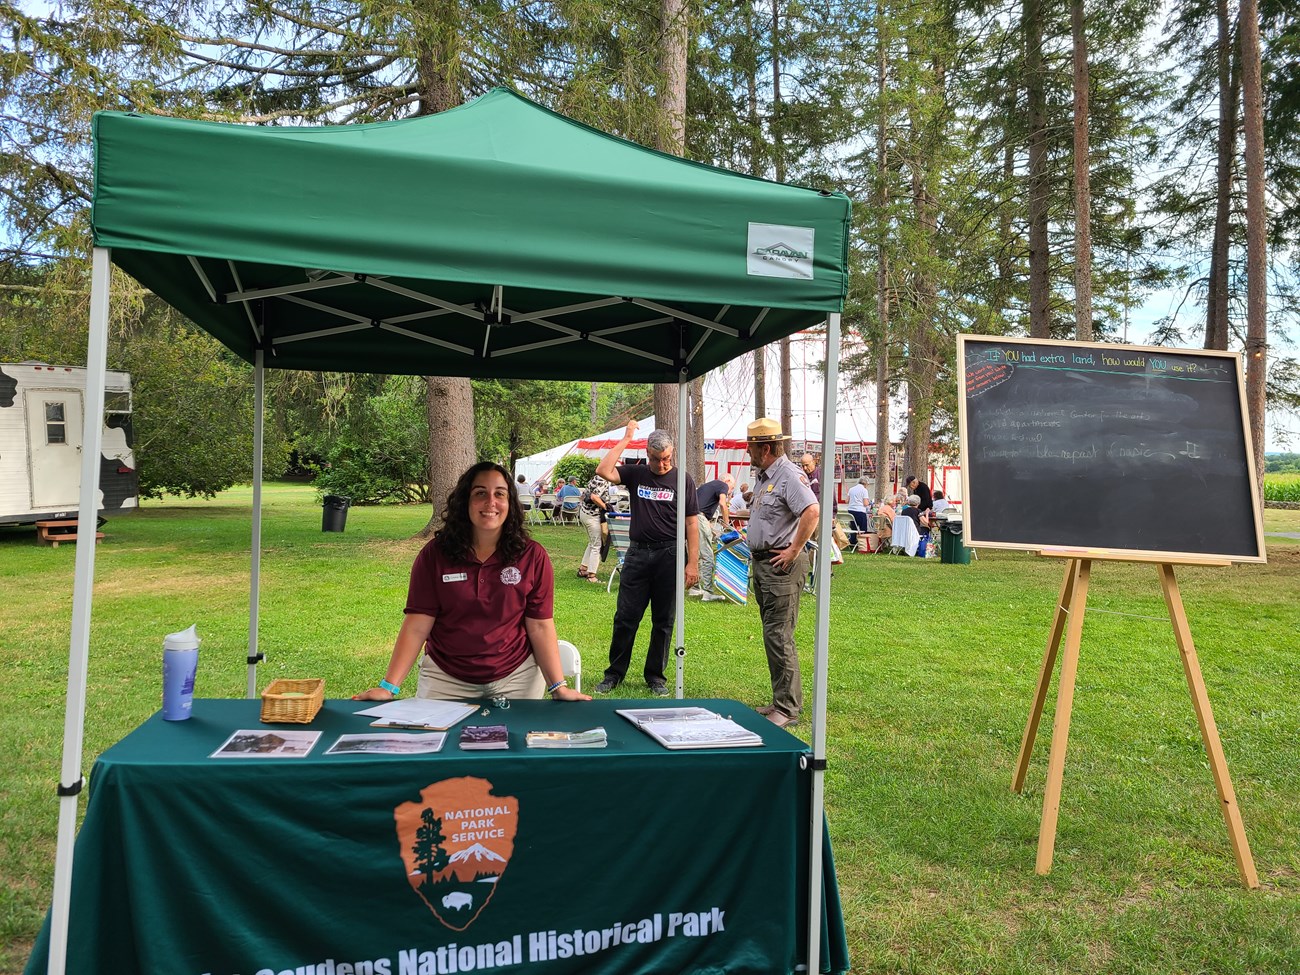 Cristina in her ACE uniform in front of a park service booth ready to talk to visitors outside